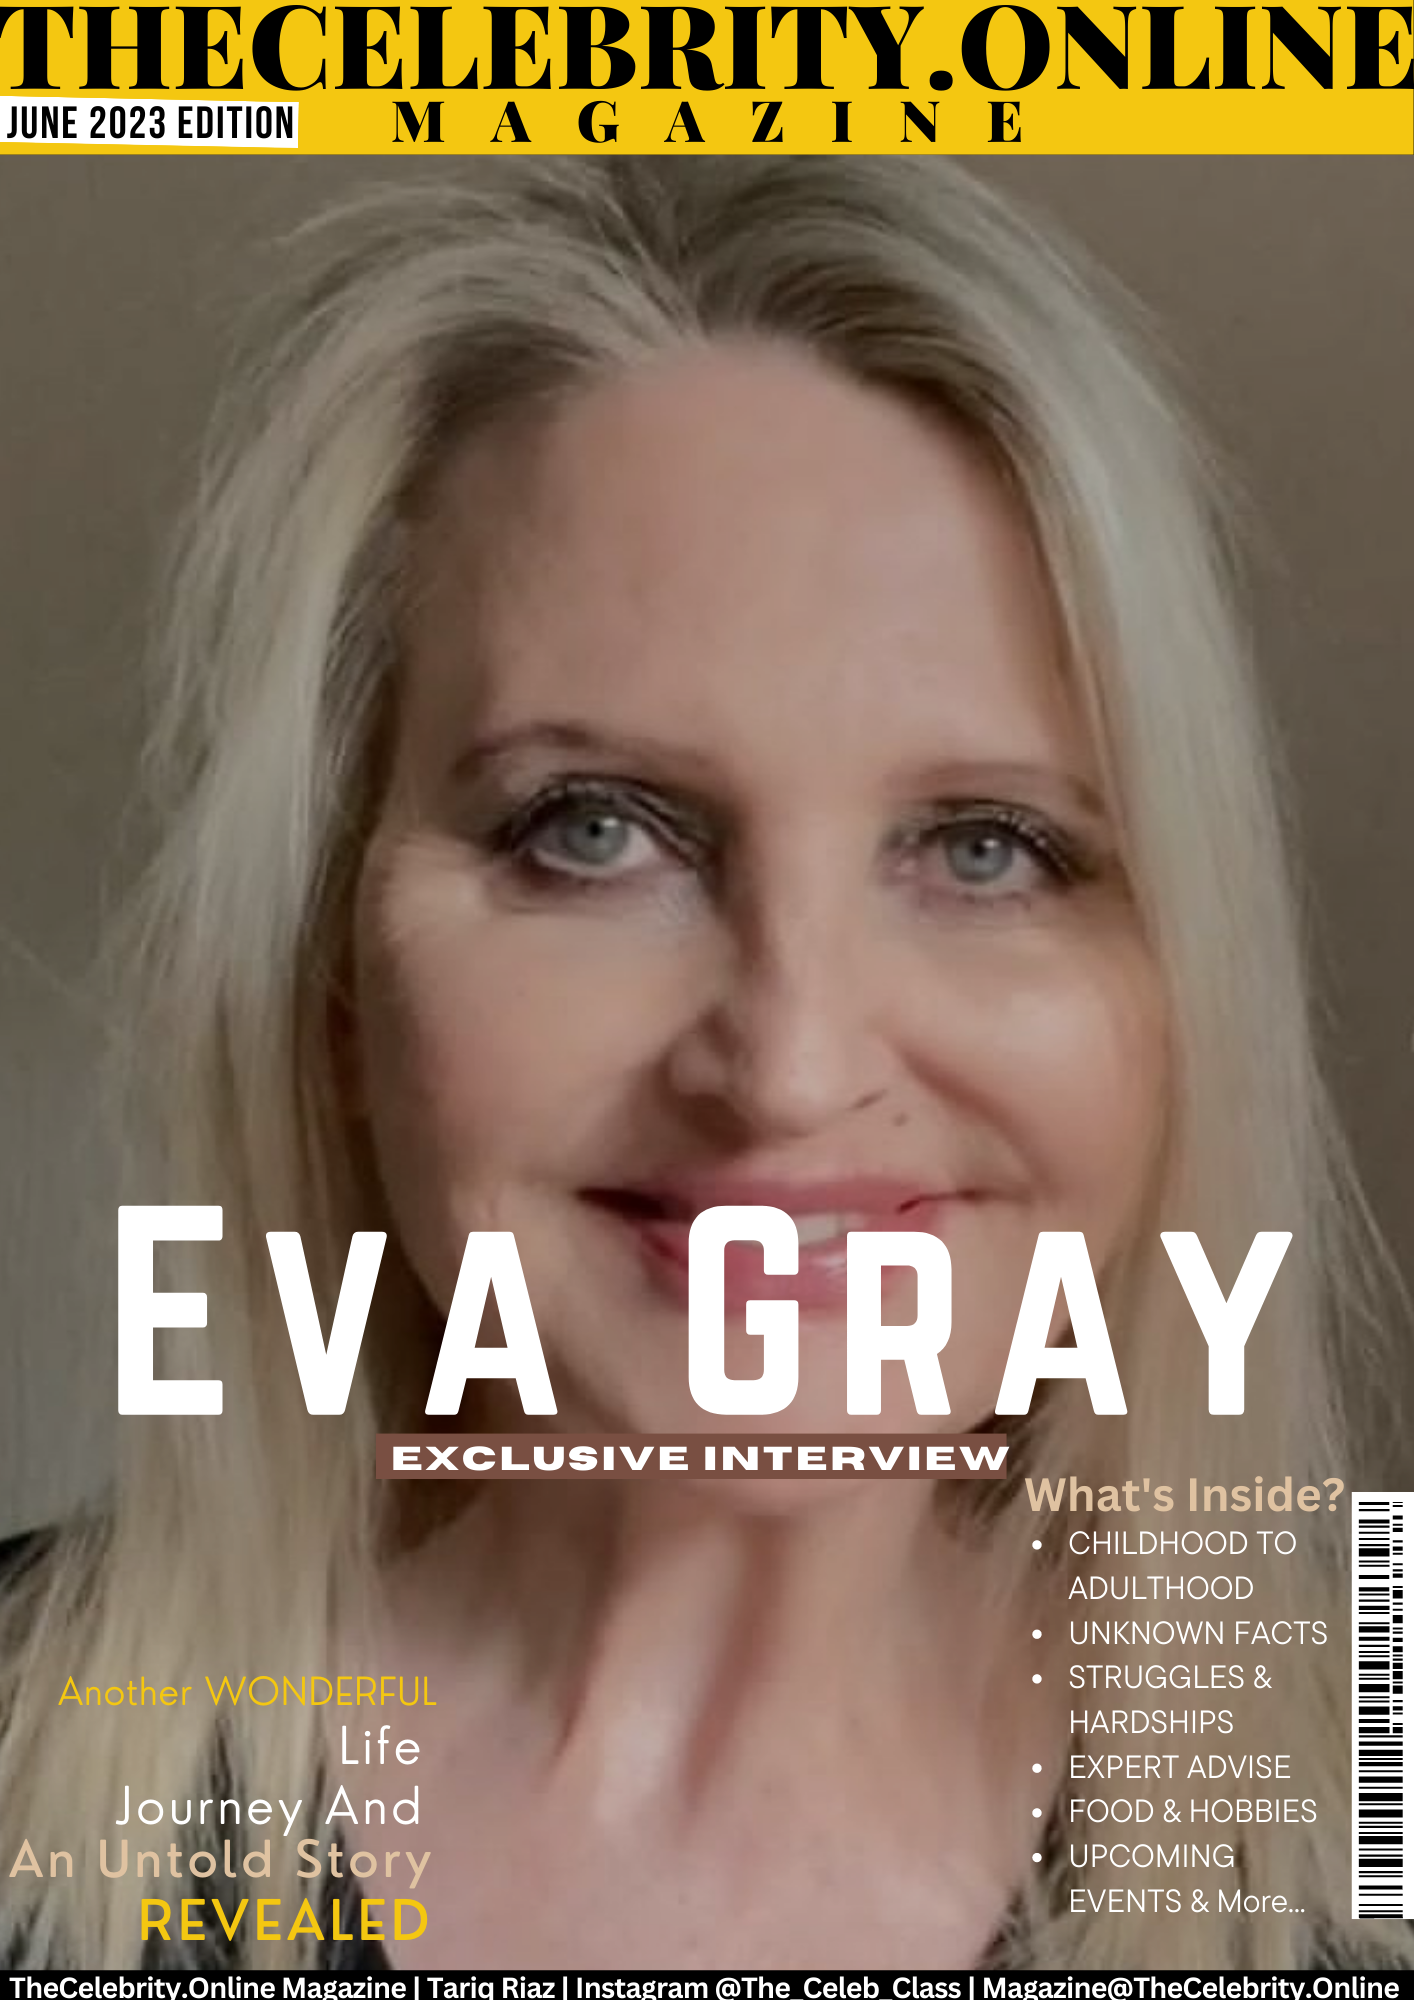 Eva Gray Exclusive Interview – ‘Keeping Myself Focused On What Truly Matters In Life’